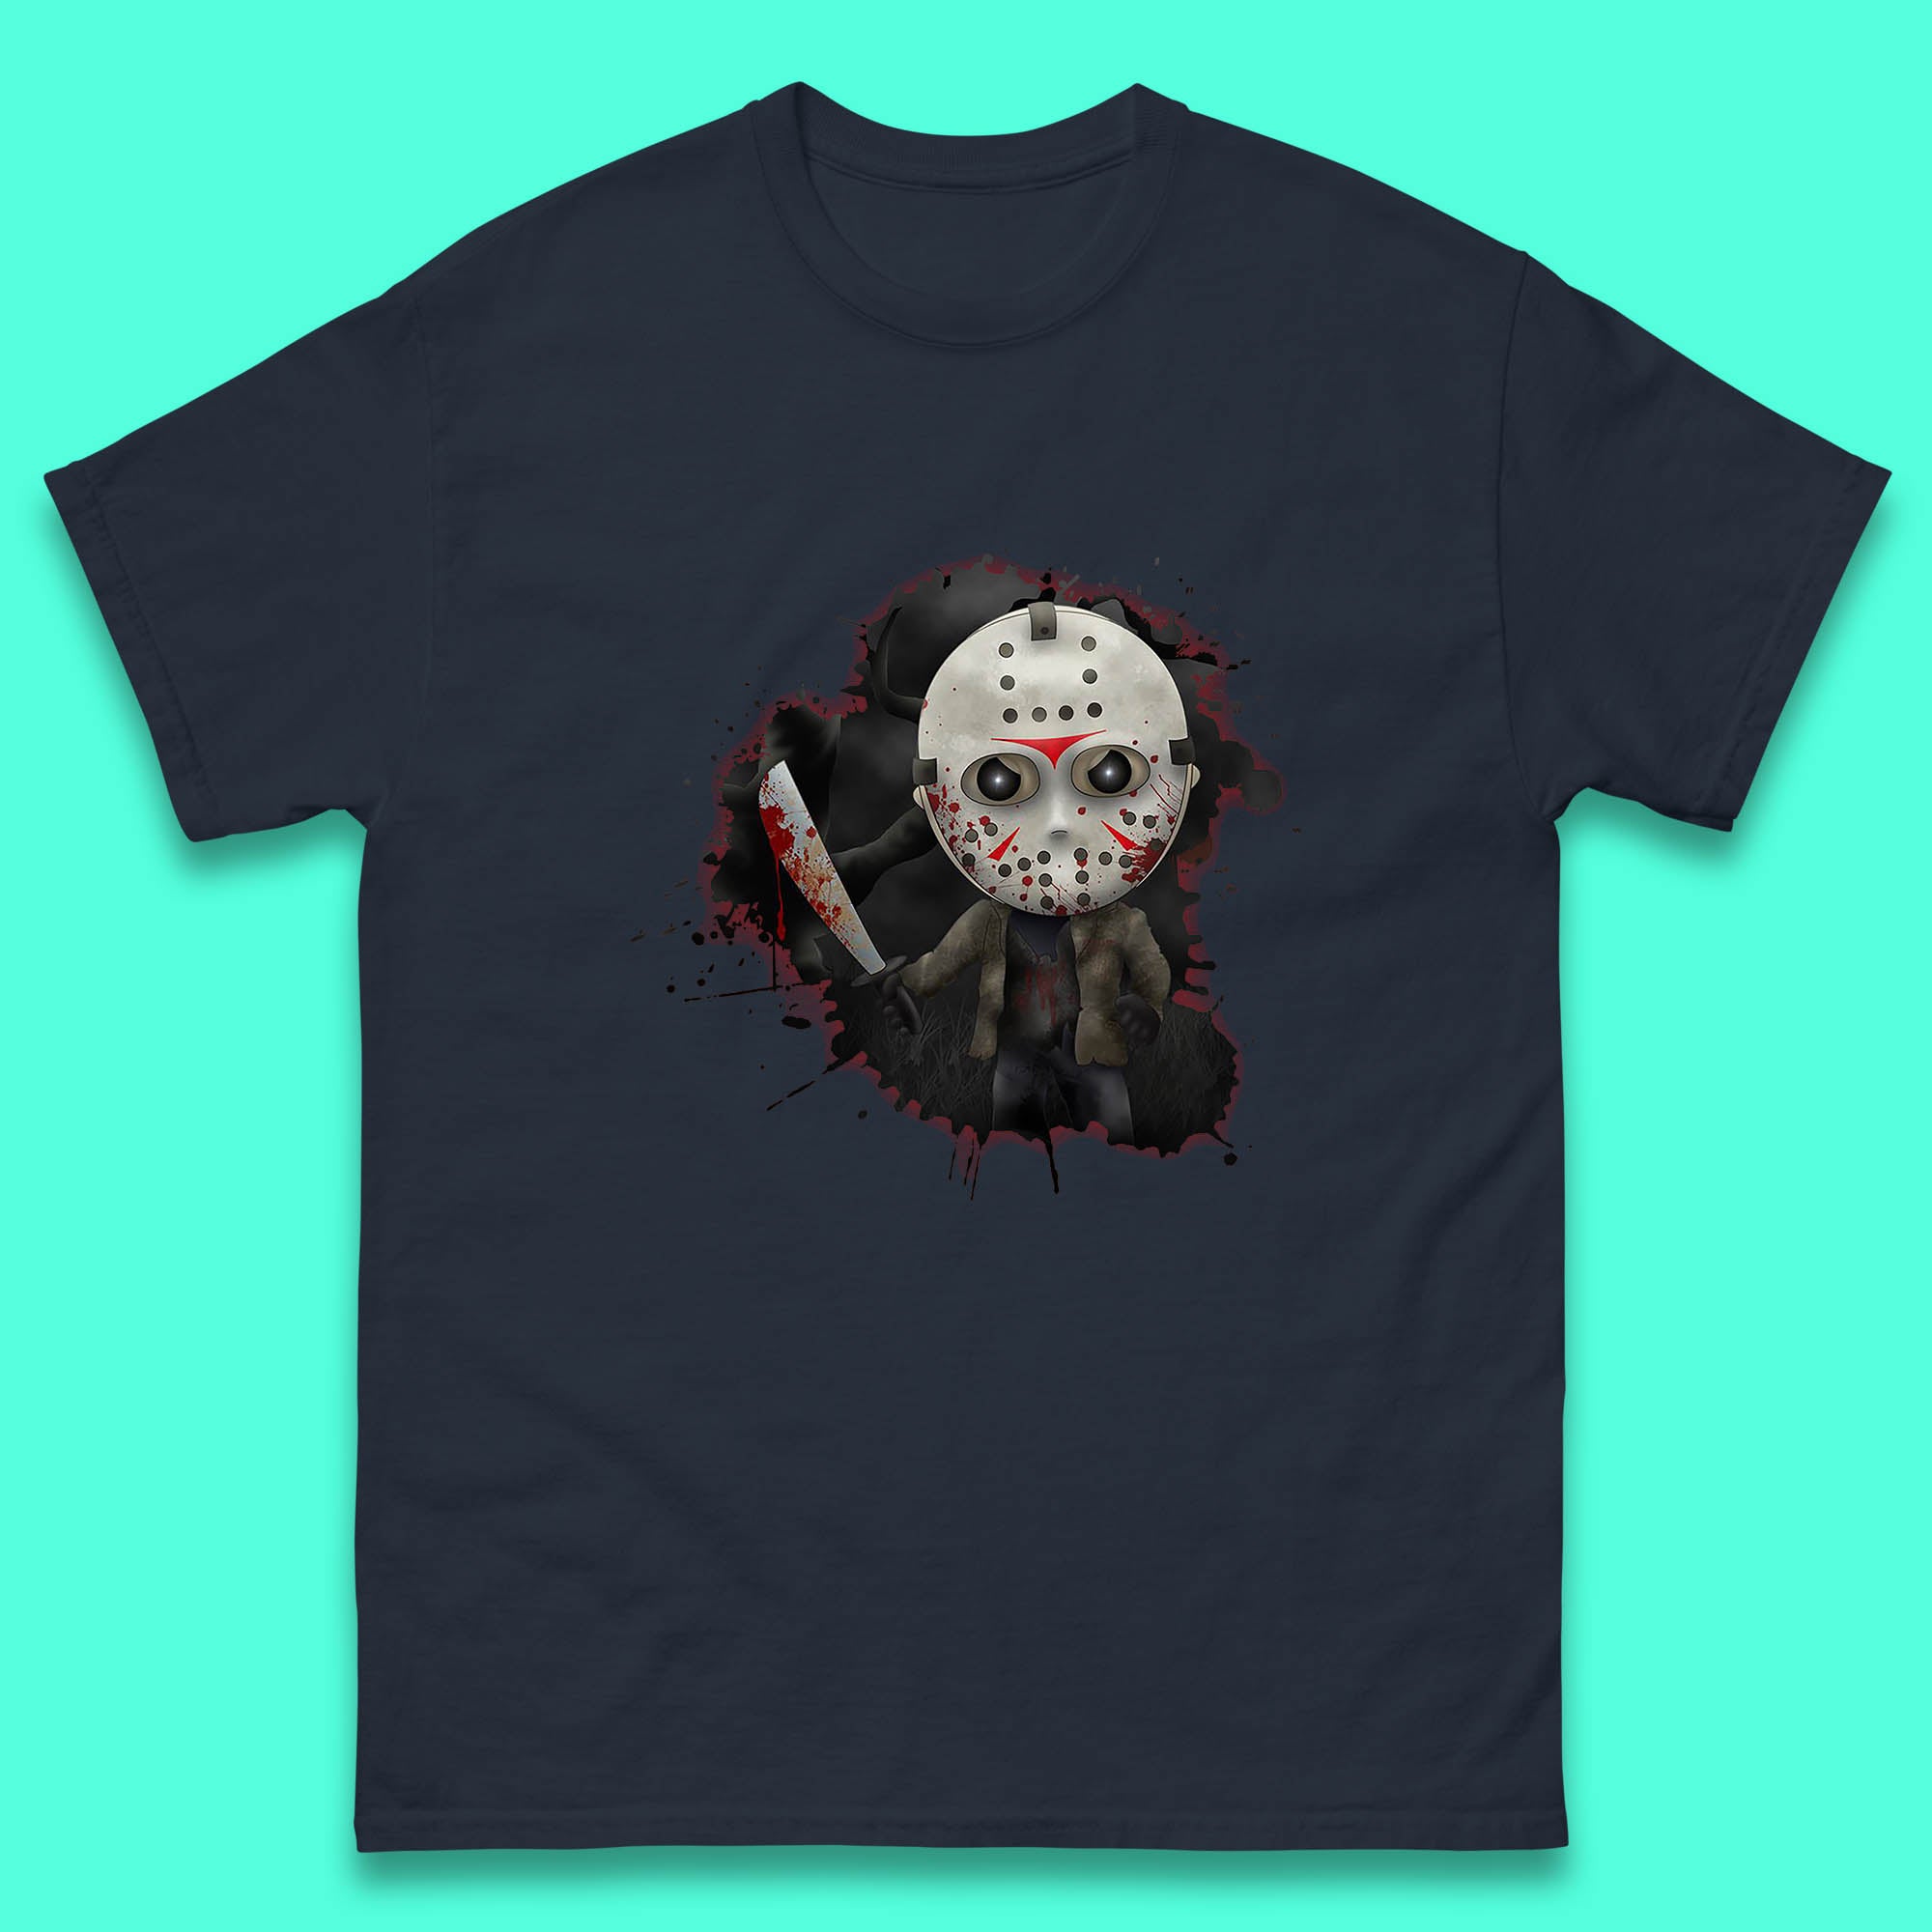 Chibi Jason Voorhees Holding Bloody Knife Halloween Friday The 13th Horror Movie Character Mens Tee Top